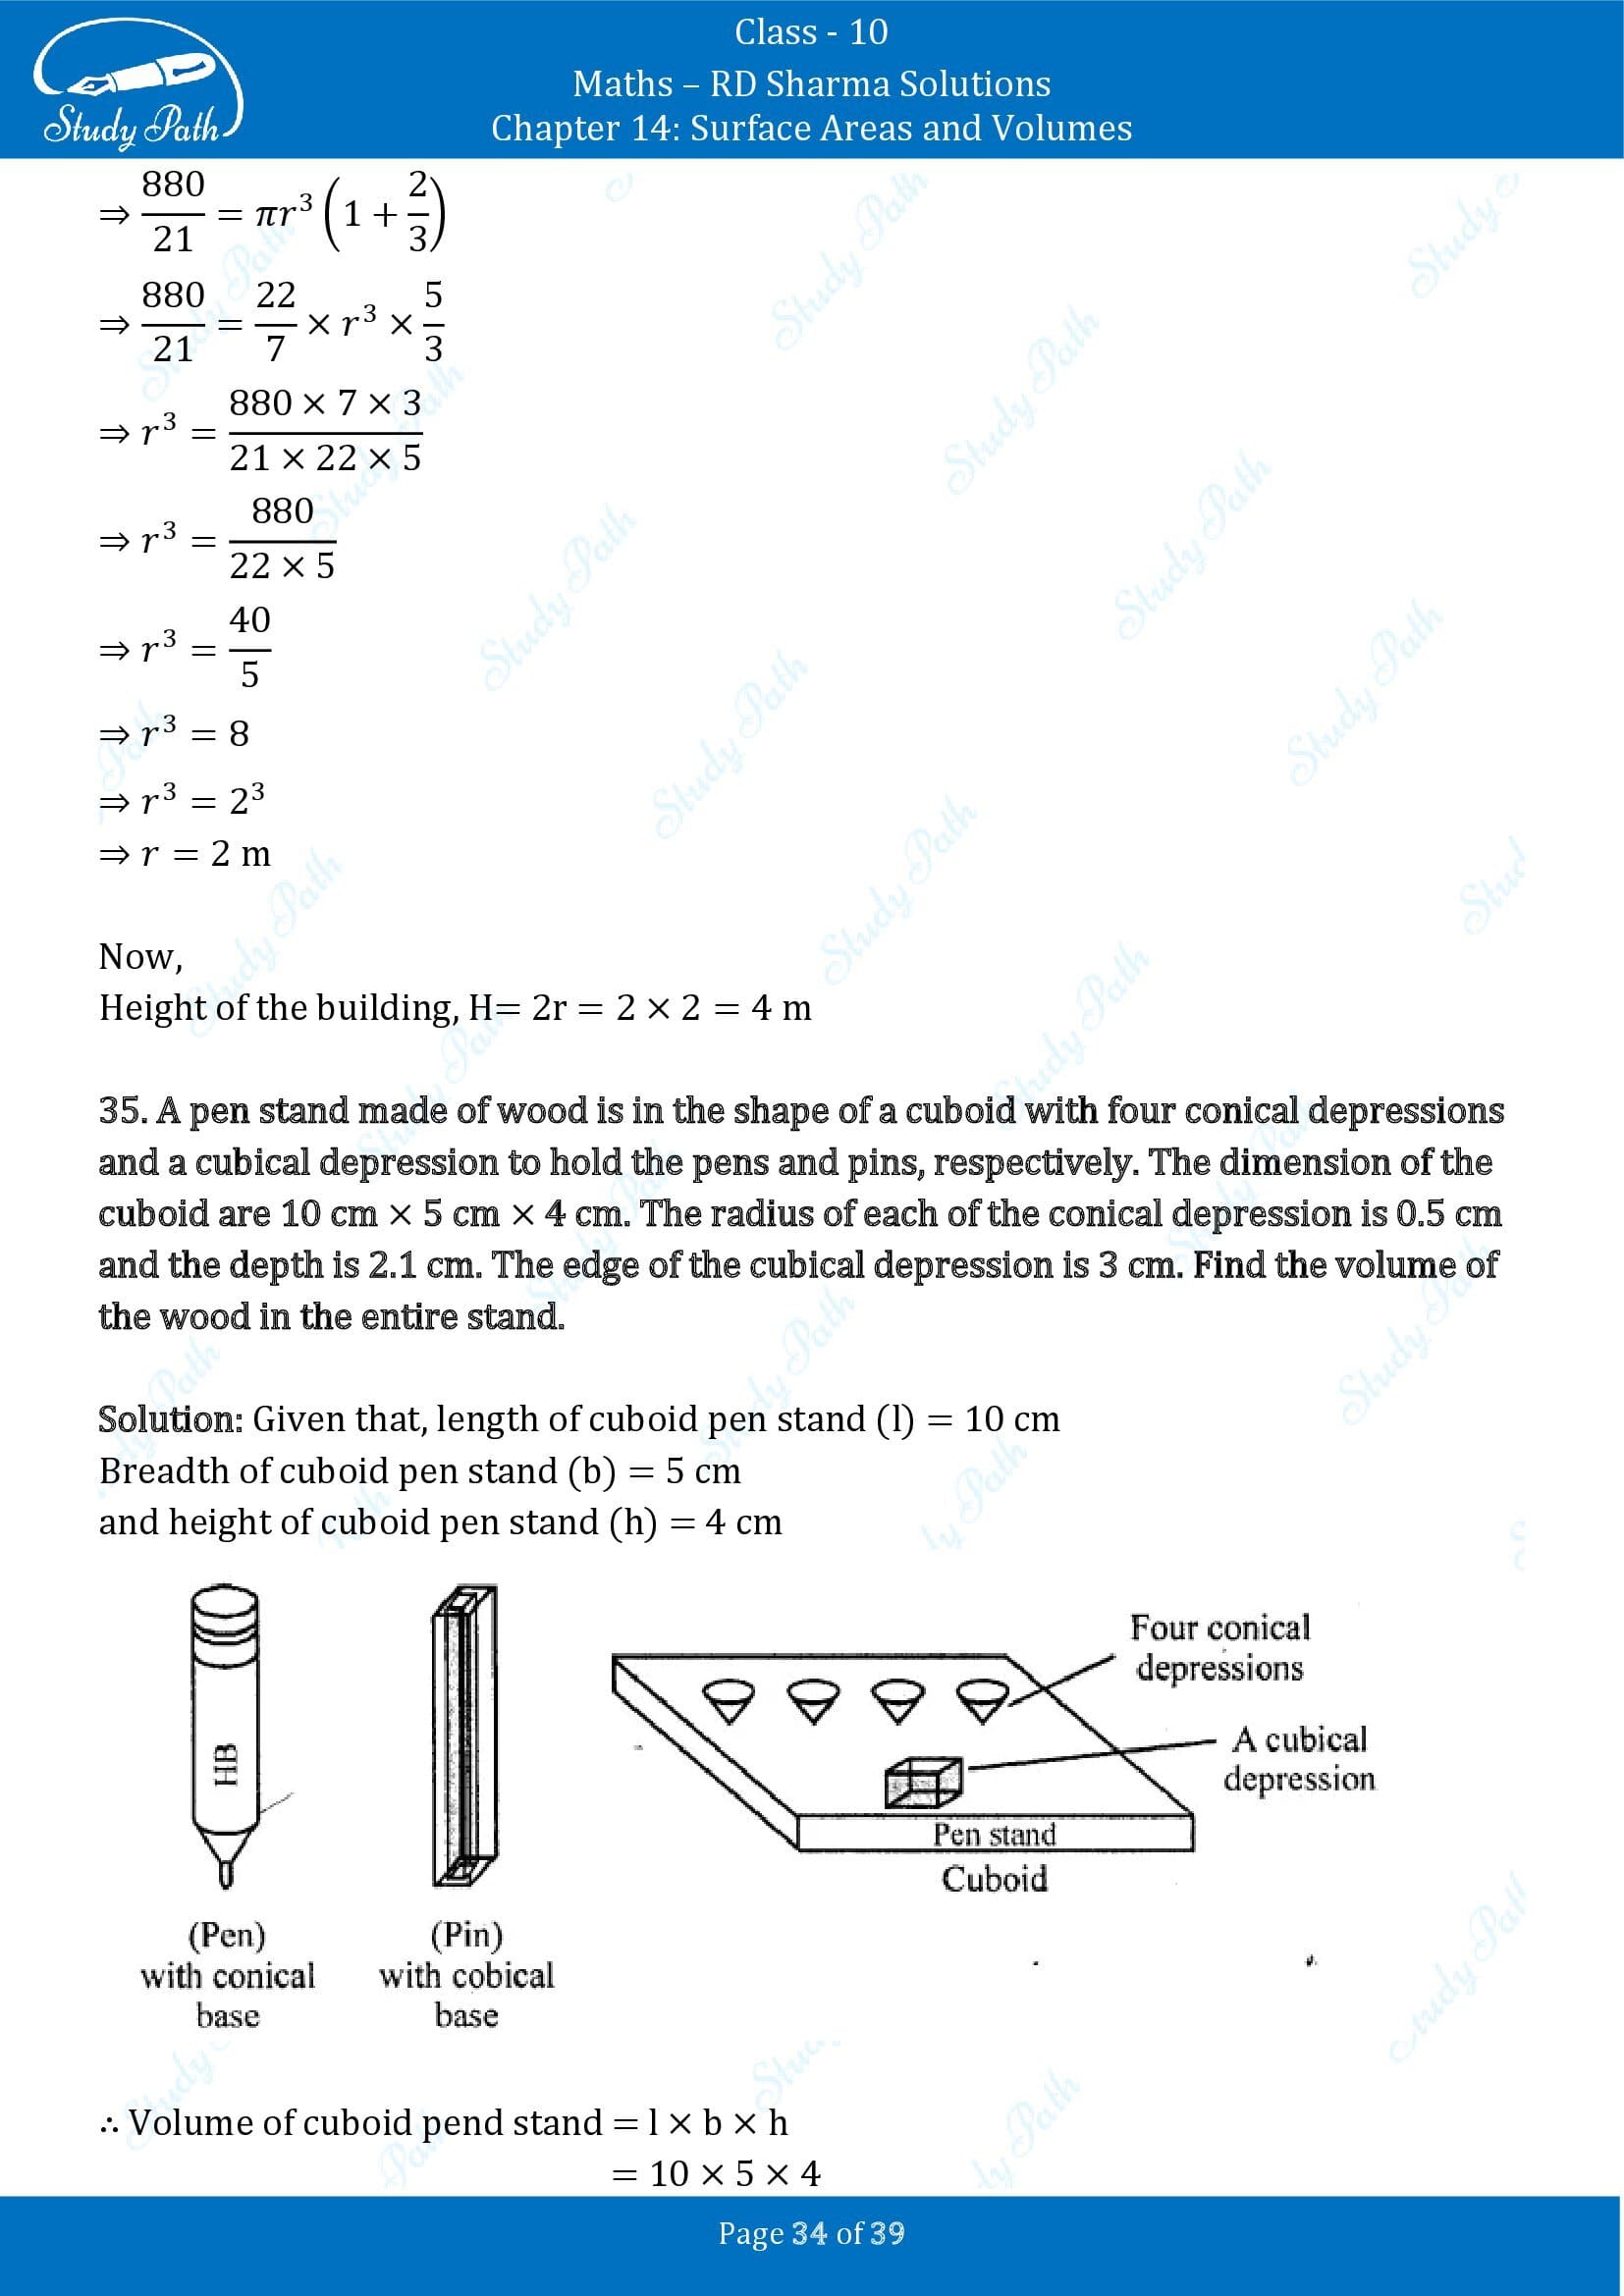 RD Sharma Solutions Class 10 Chapter 14 Surface Areas and Volumes Exercise 14.2 00034